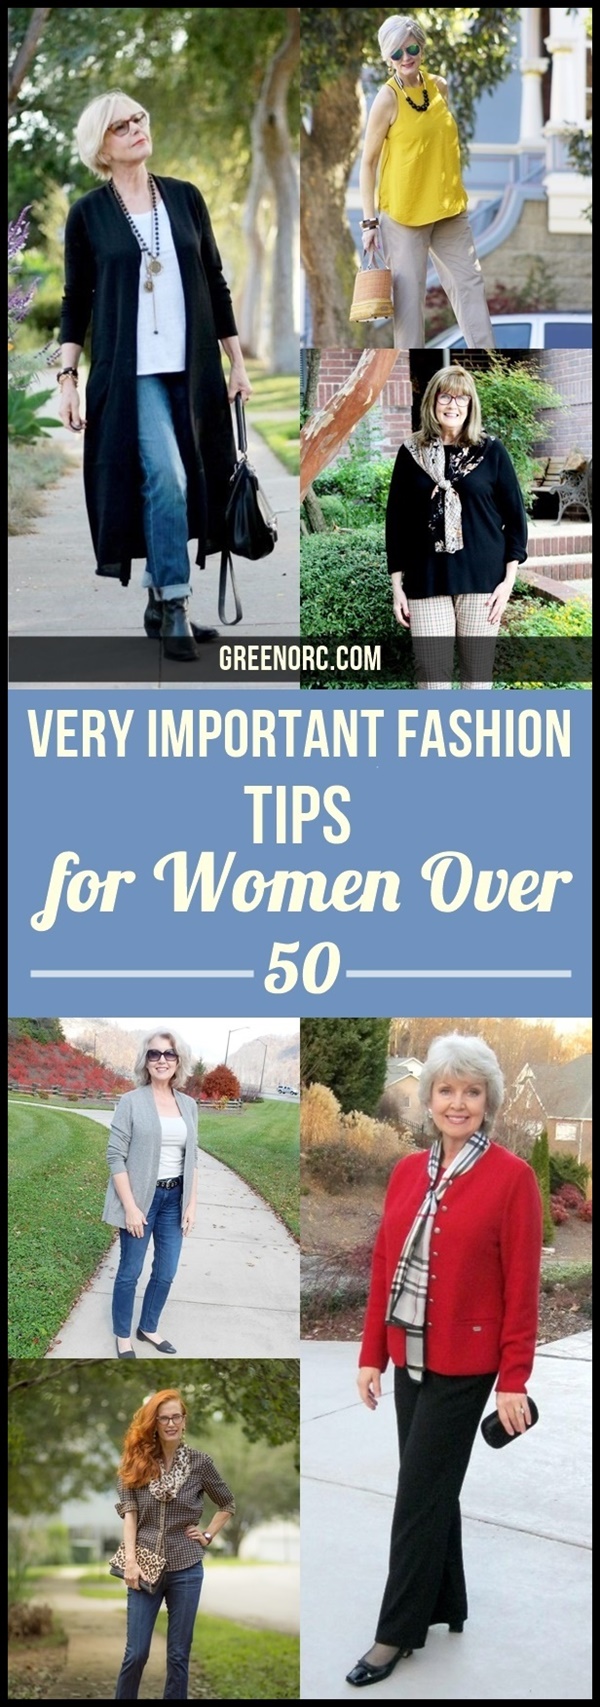 15 Very Important Fashion Tips for Women Over 50